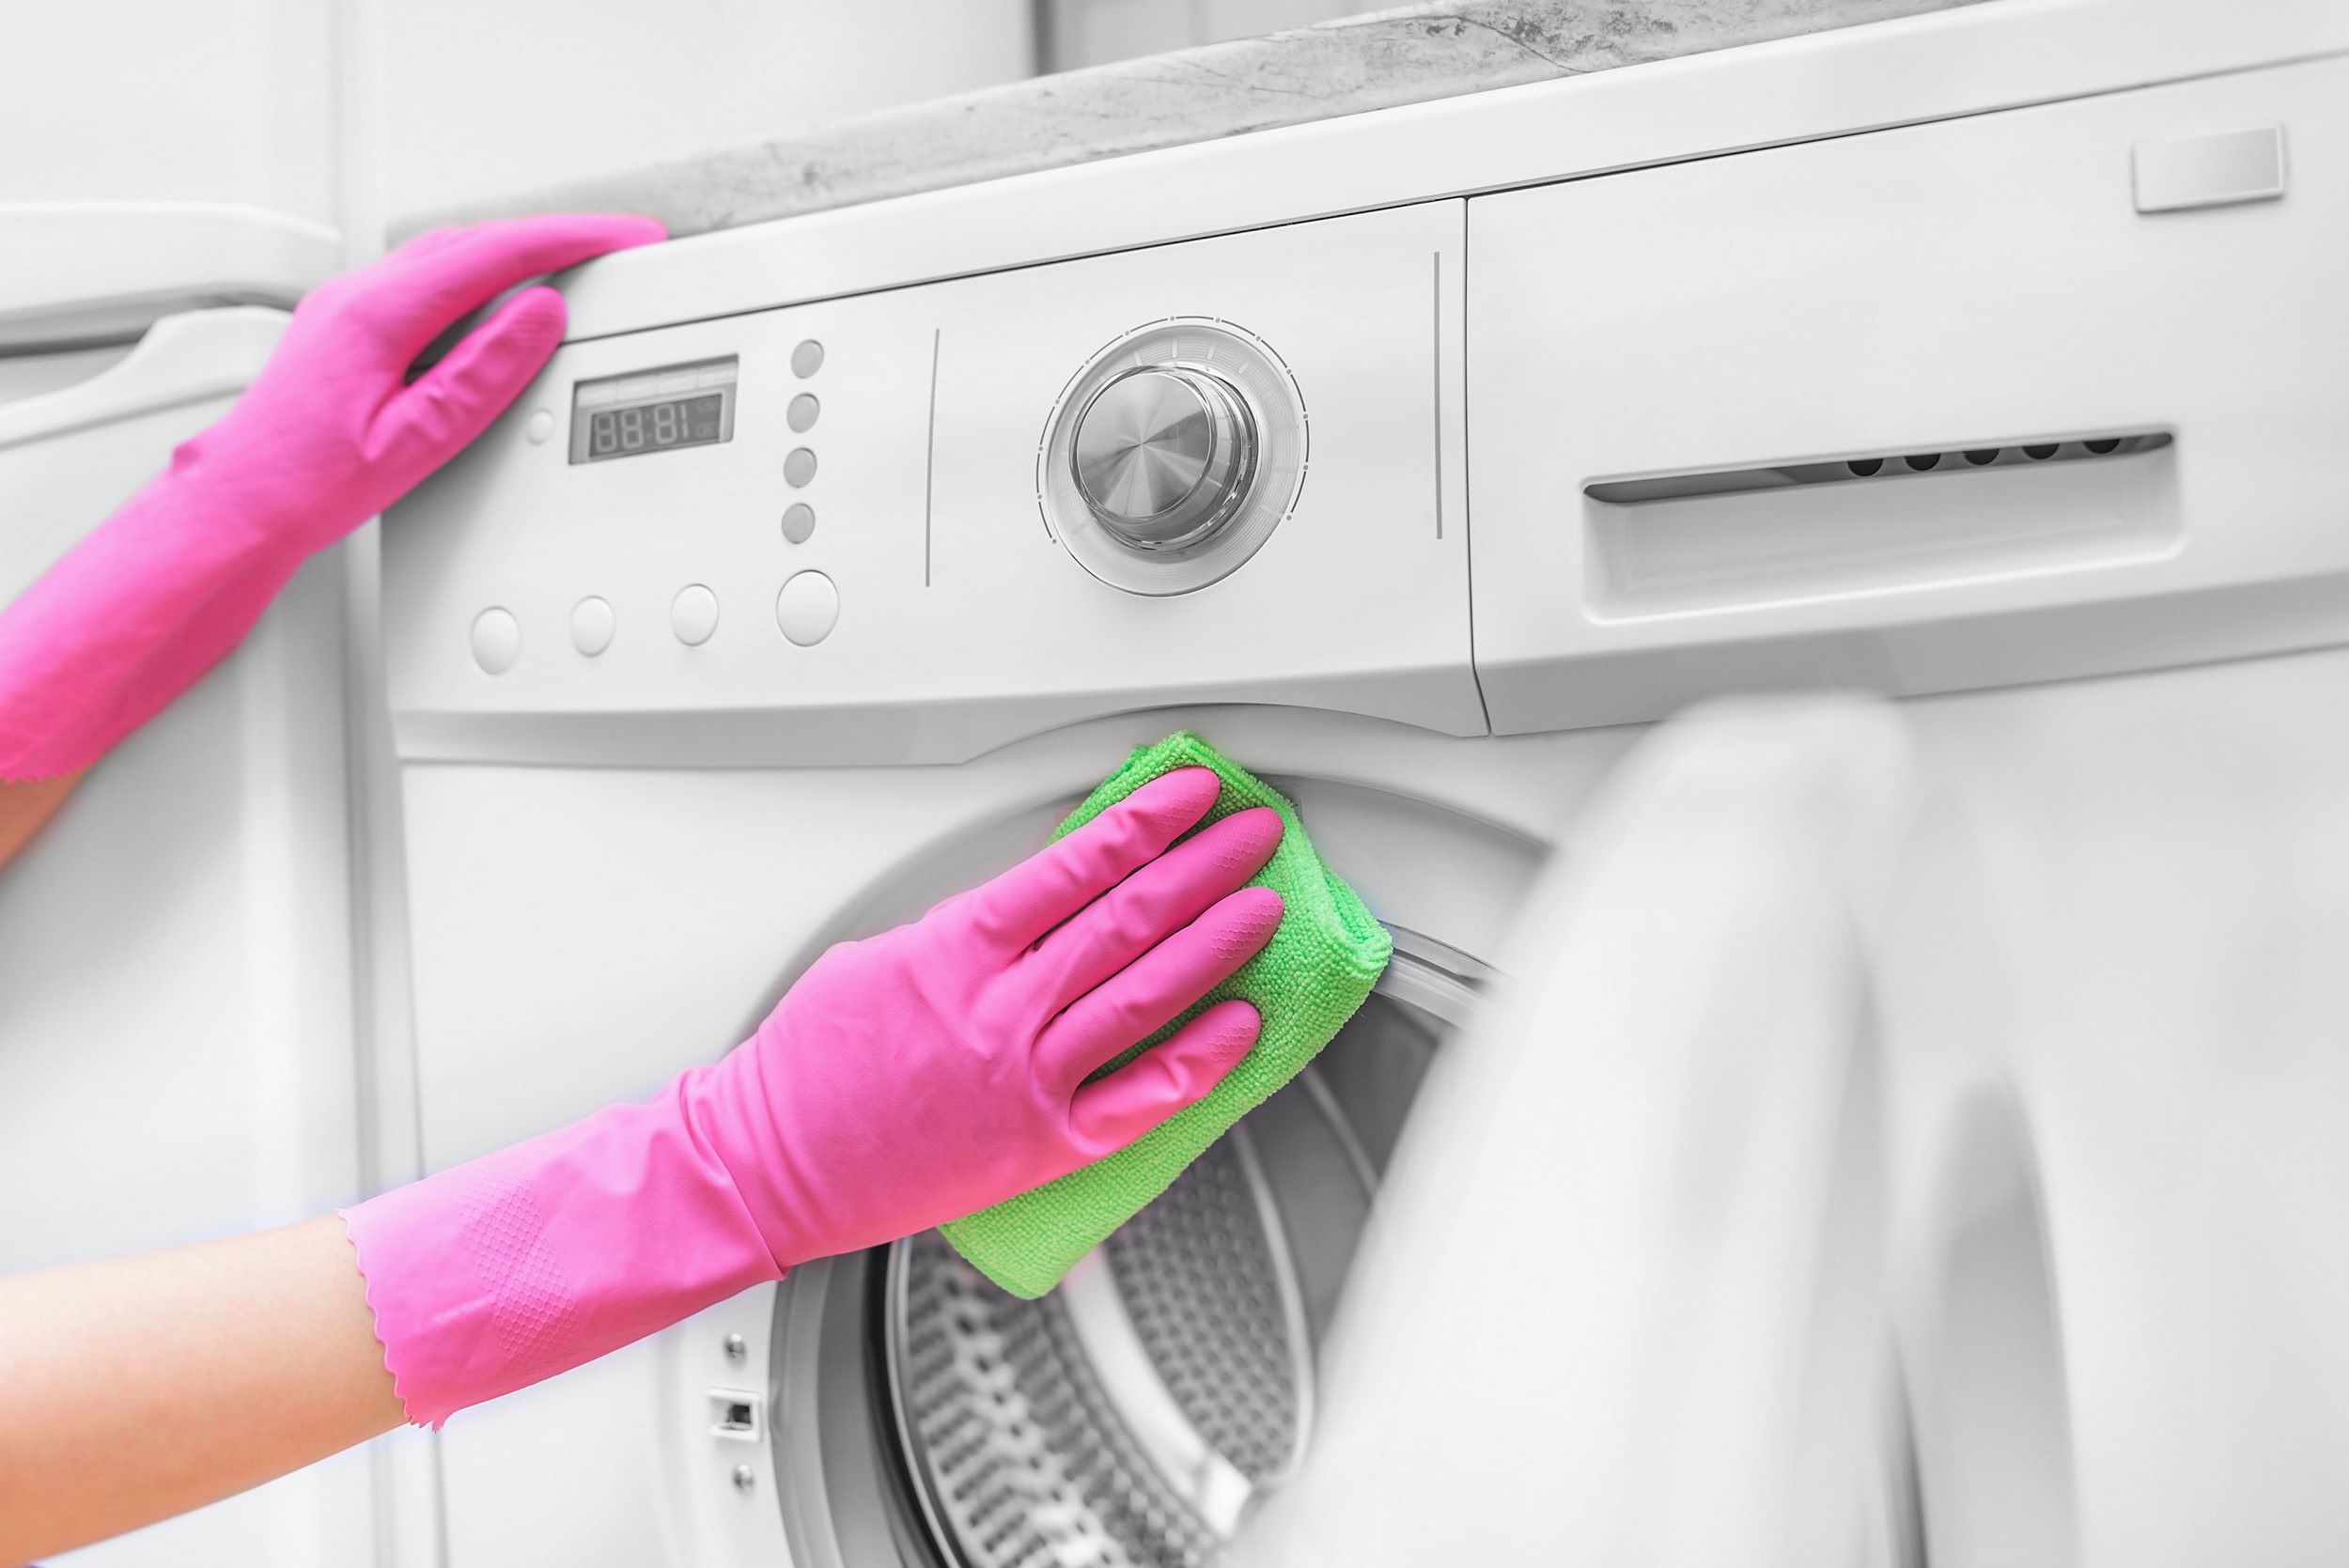 How To Get Grease Out Of A Washing Machine